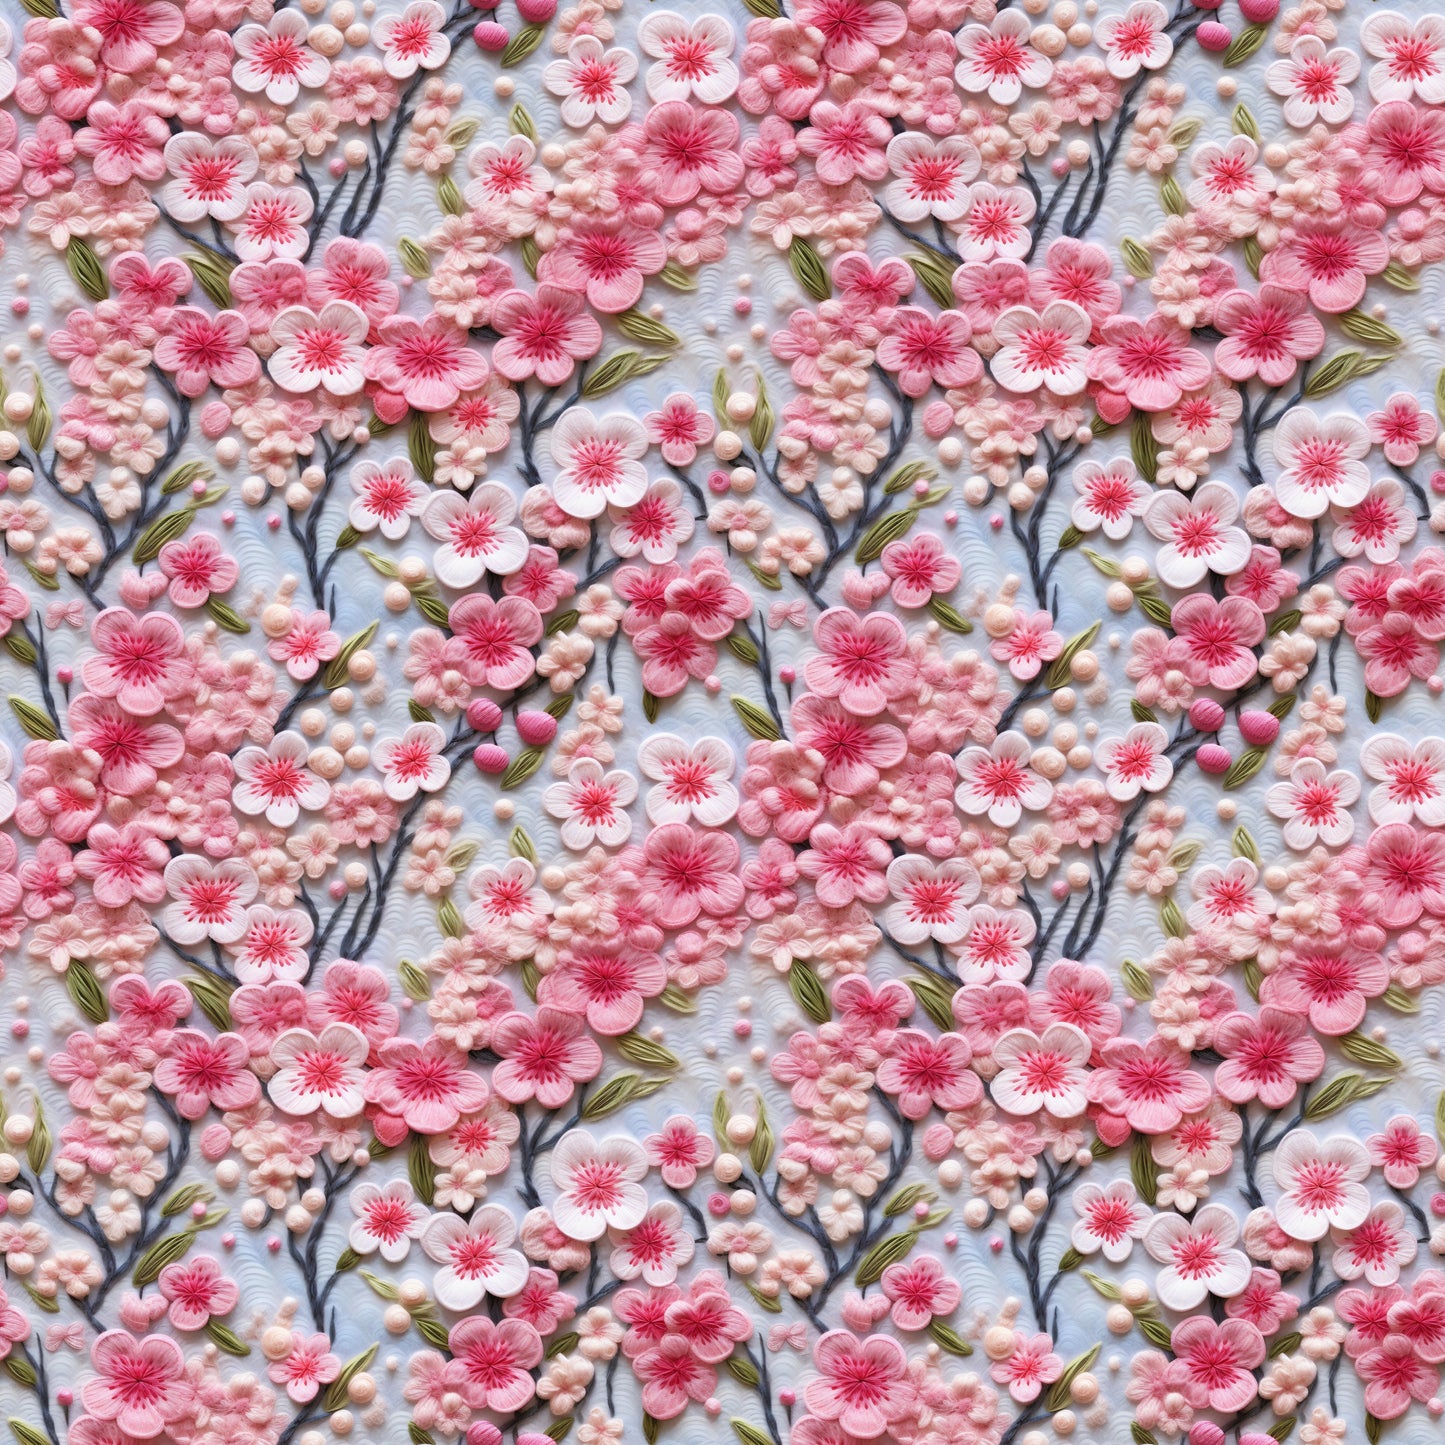 CHERRY BLOSSOM EMBROIDERED PATTERN VINYL - MULTIPLE VARIATIONS